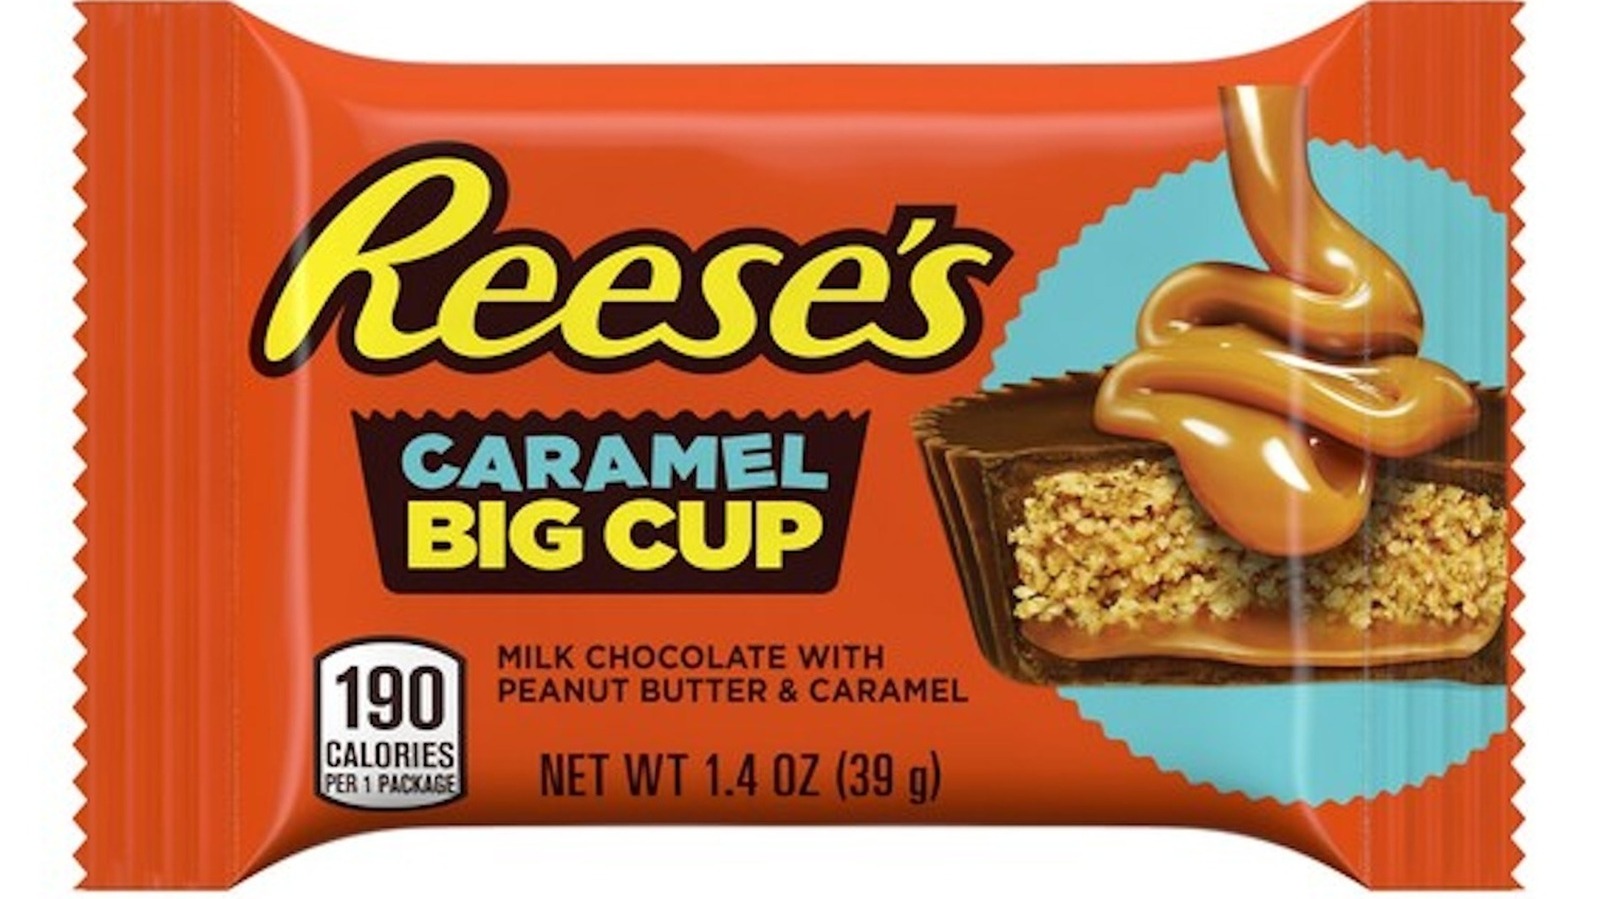 https://www.tastingtable.com/img/gallery/reeses-introduces-an-unexpected-caramel-big-cup-to-candy-aisles-everywhere/l-intro-1699559725.jpg